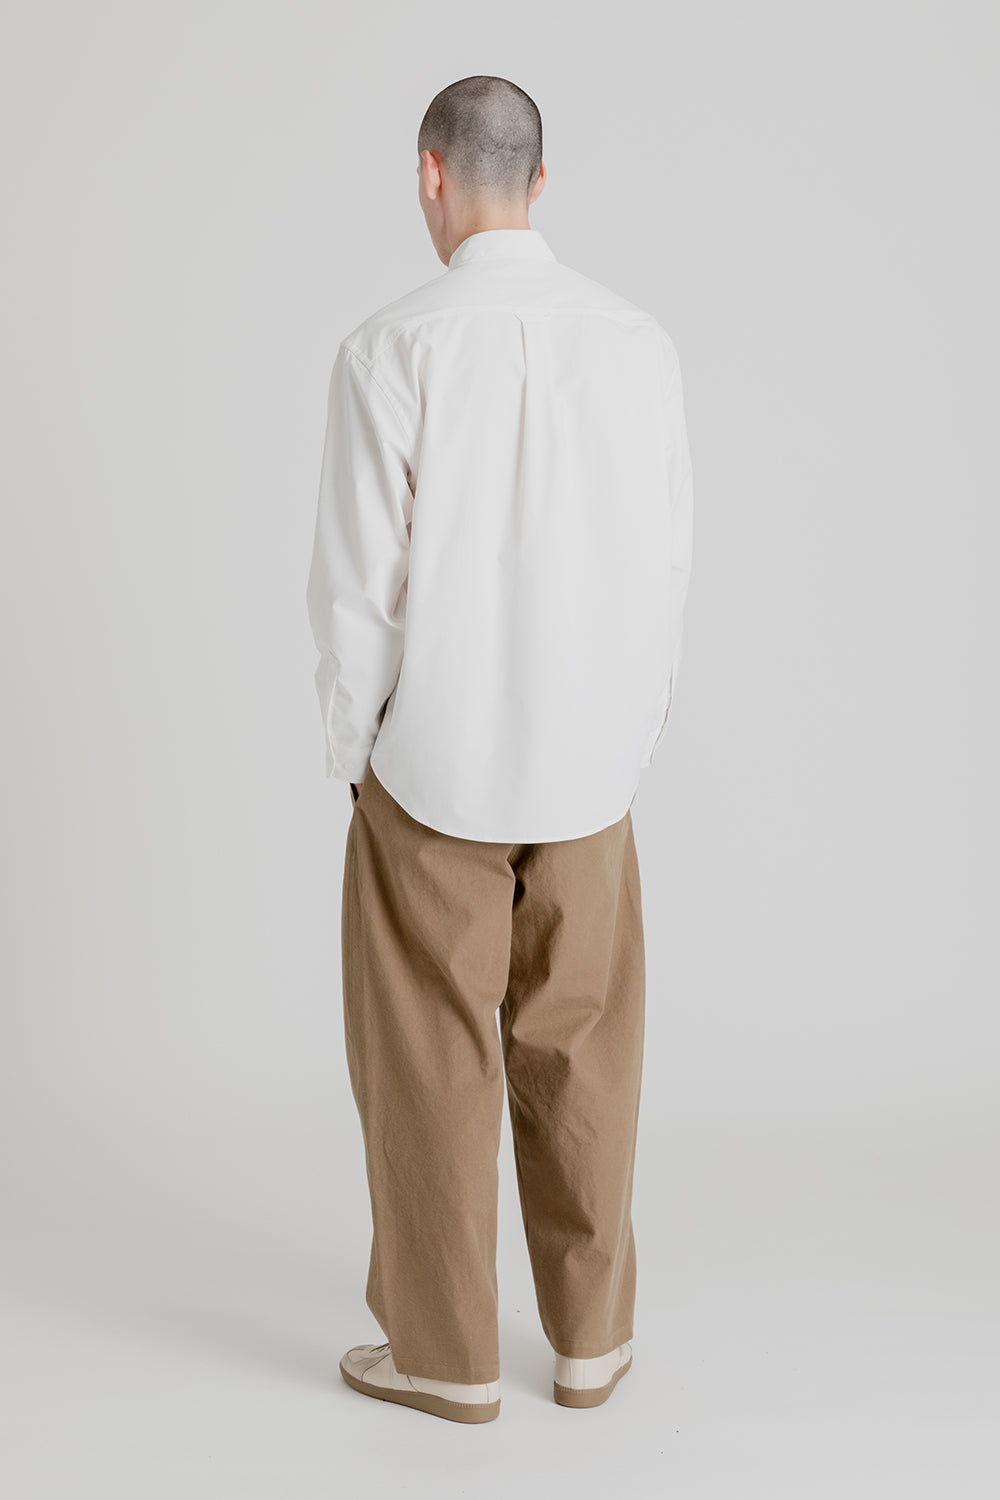 Frizmworks Deep Two Tuck Curved Pants in Desert